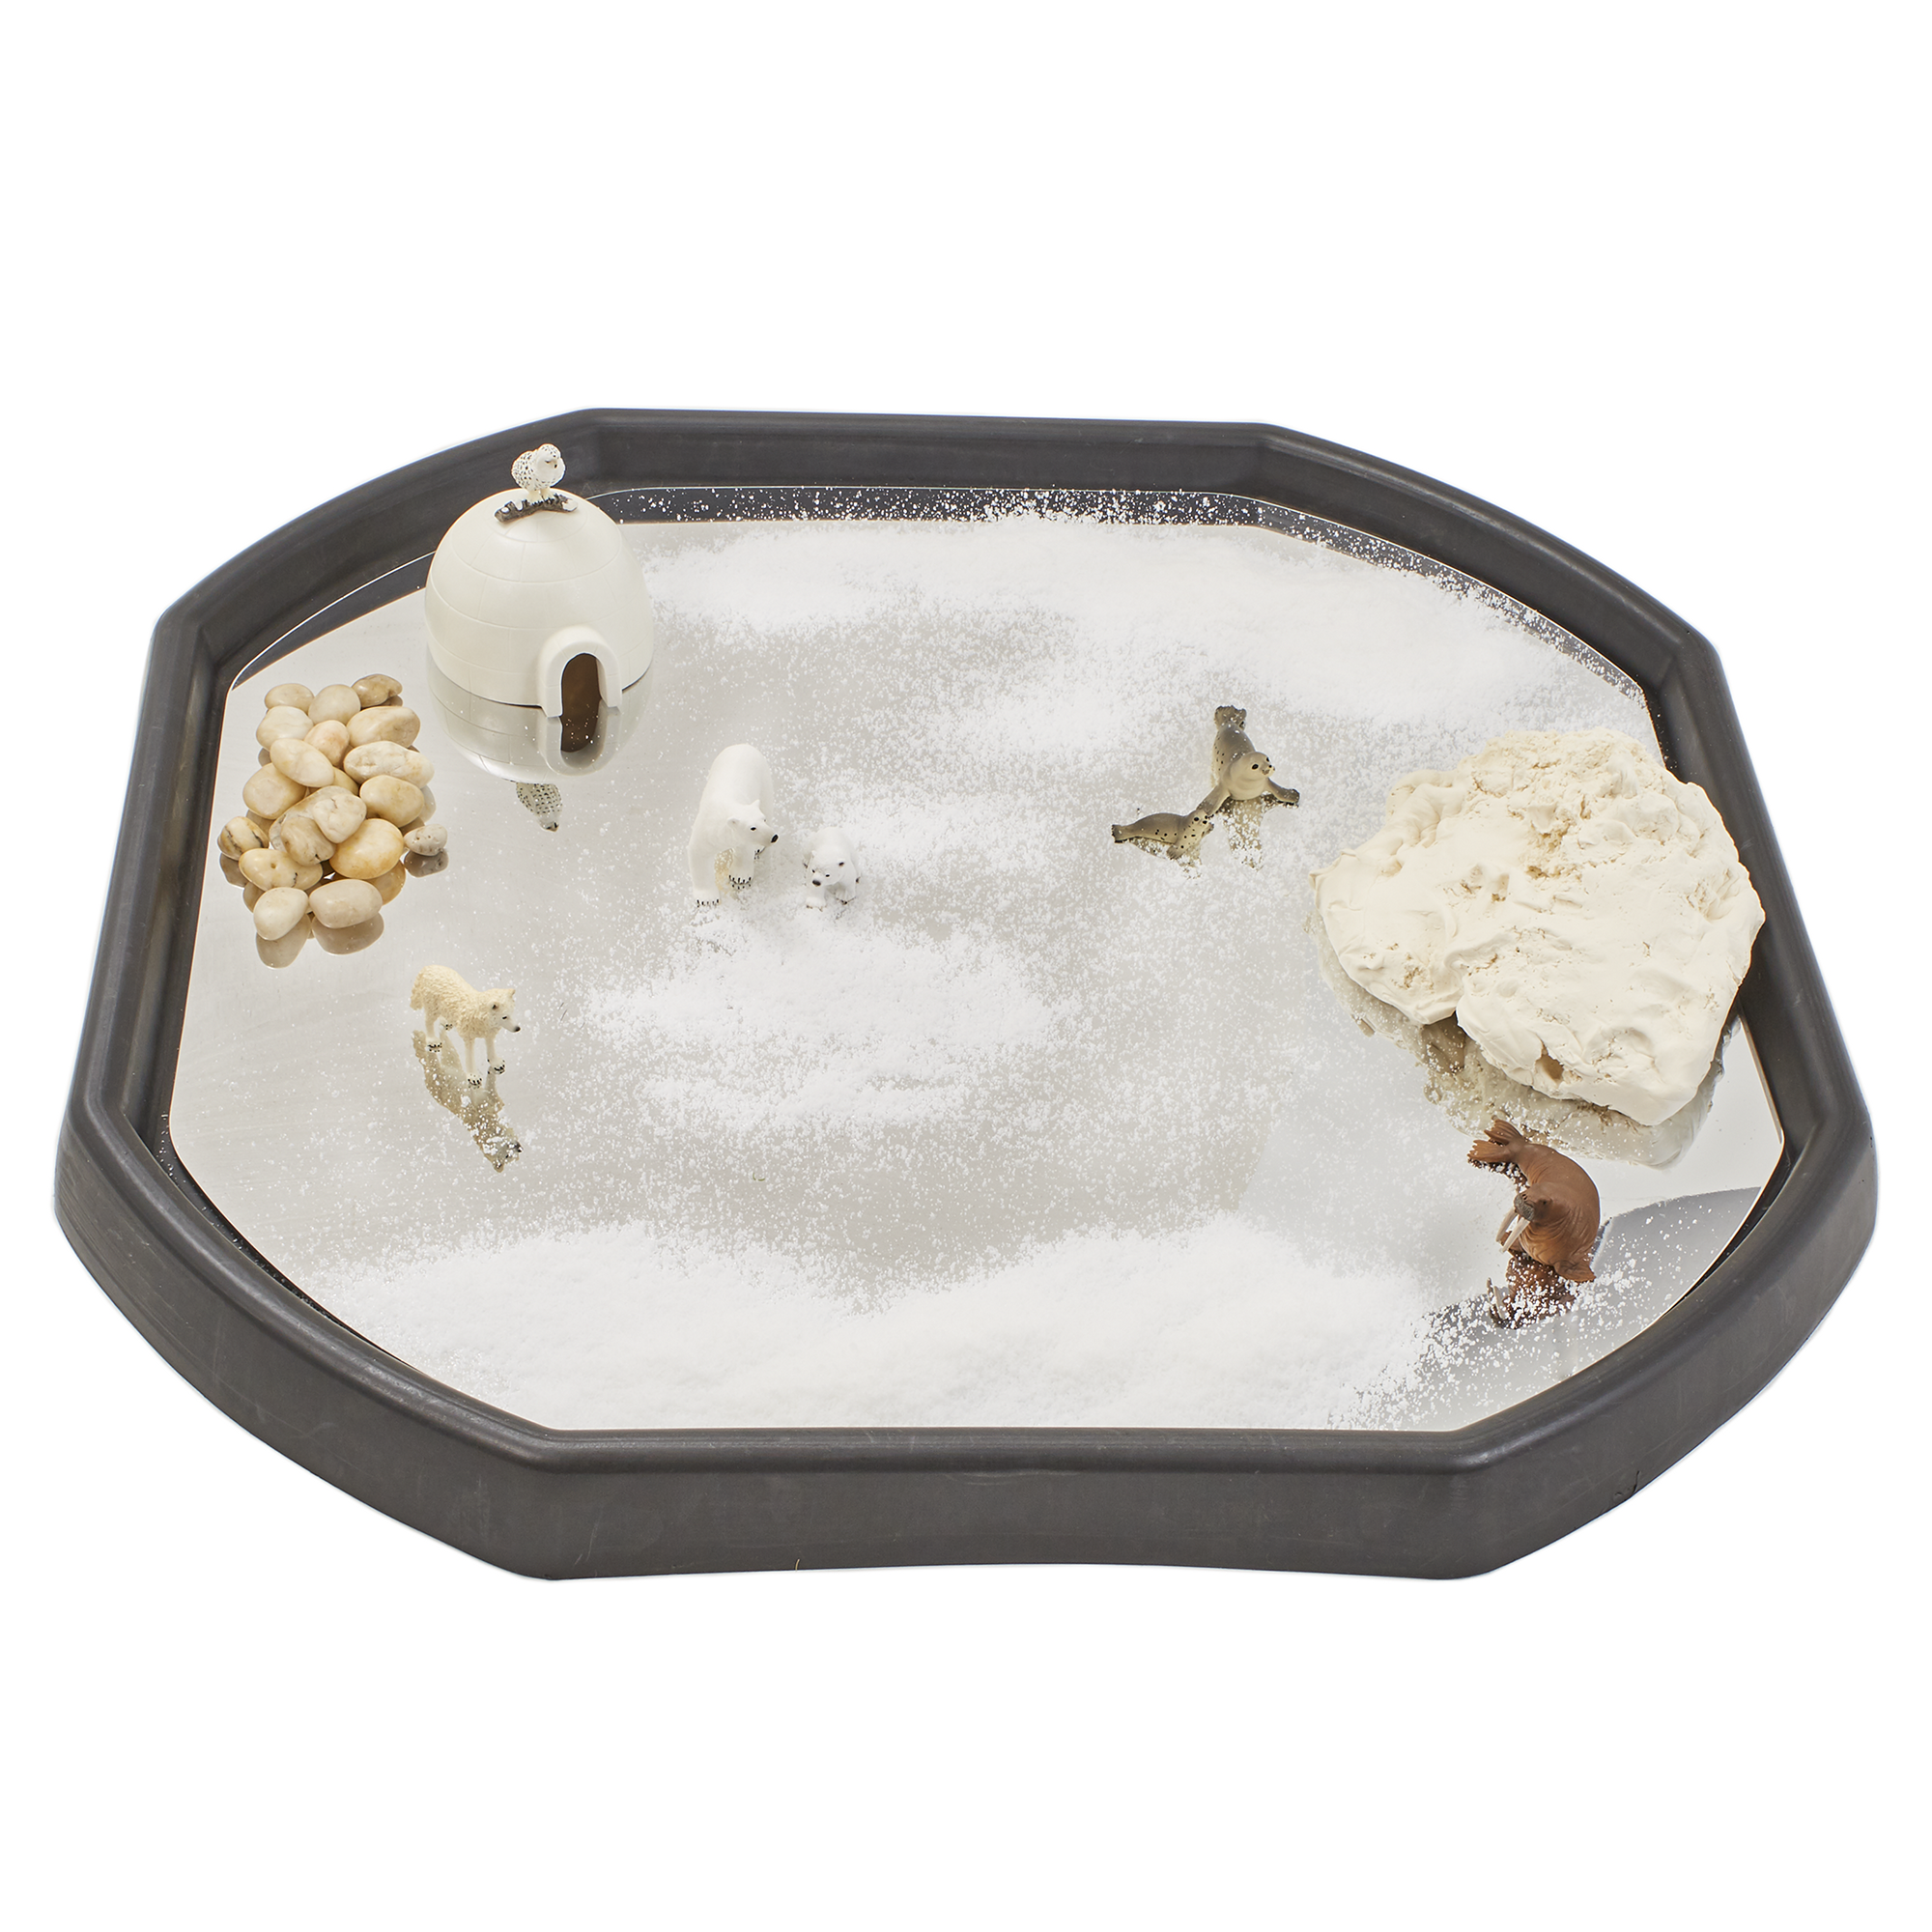 Cold Environment Play Tray Special Offer